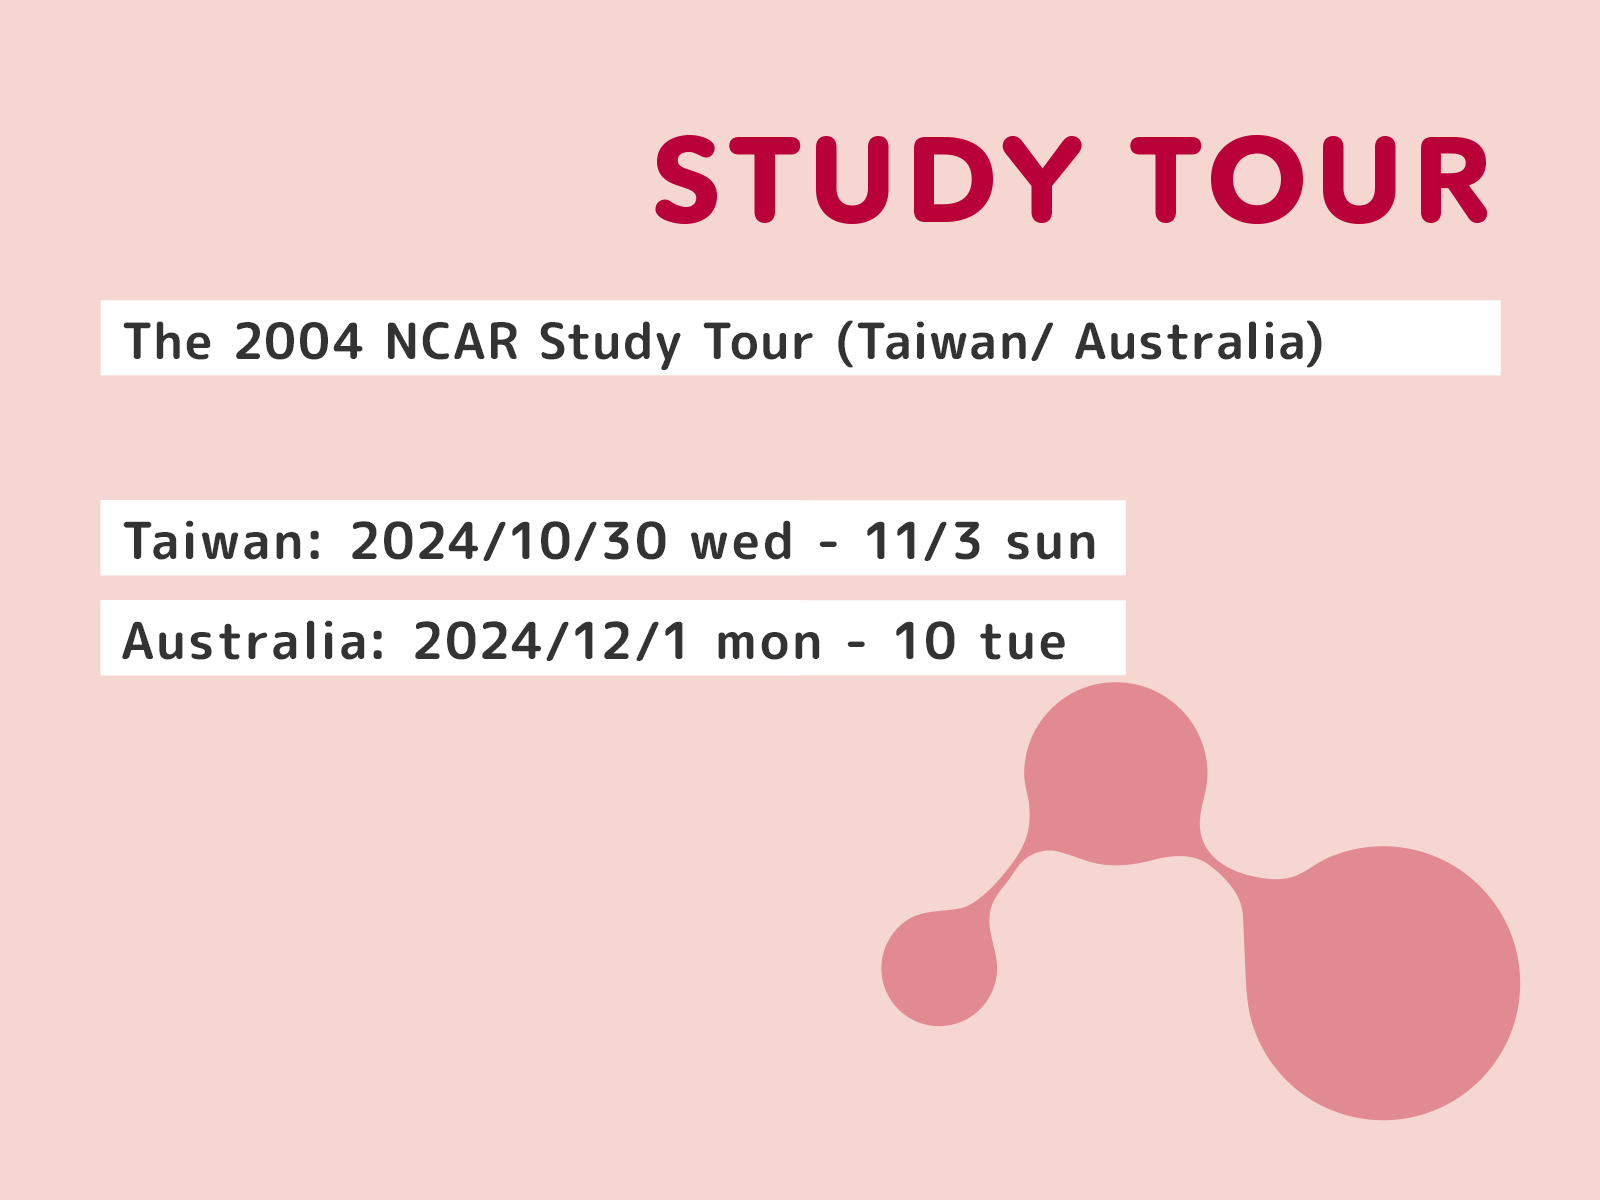 Call for Participants (Due on 7/31) : The 2024 NCAR Study Tour (Taiwan/ Australia)

